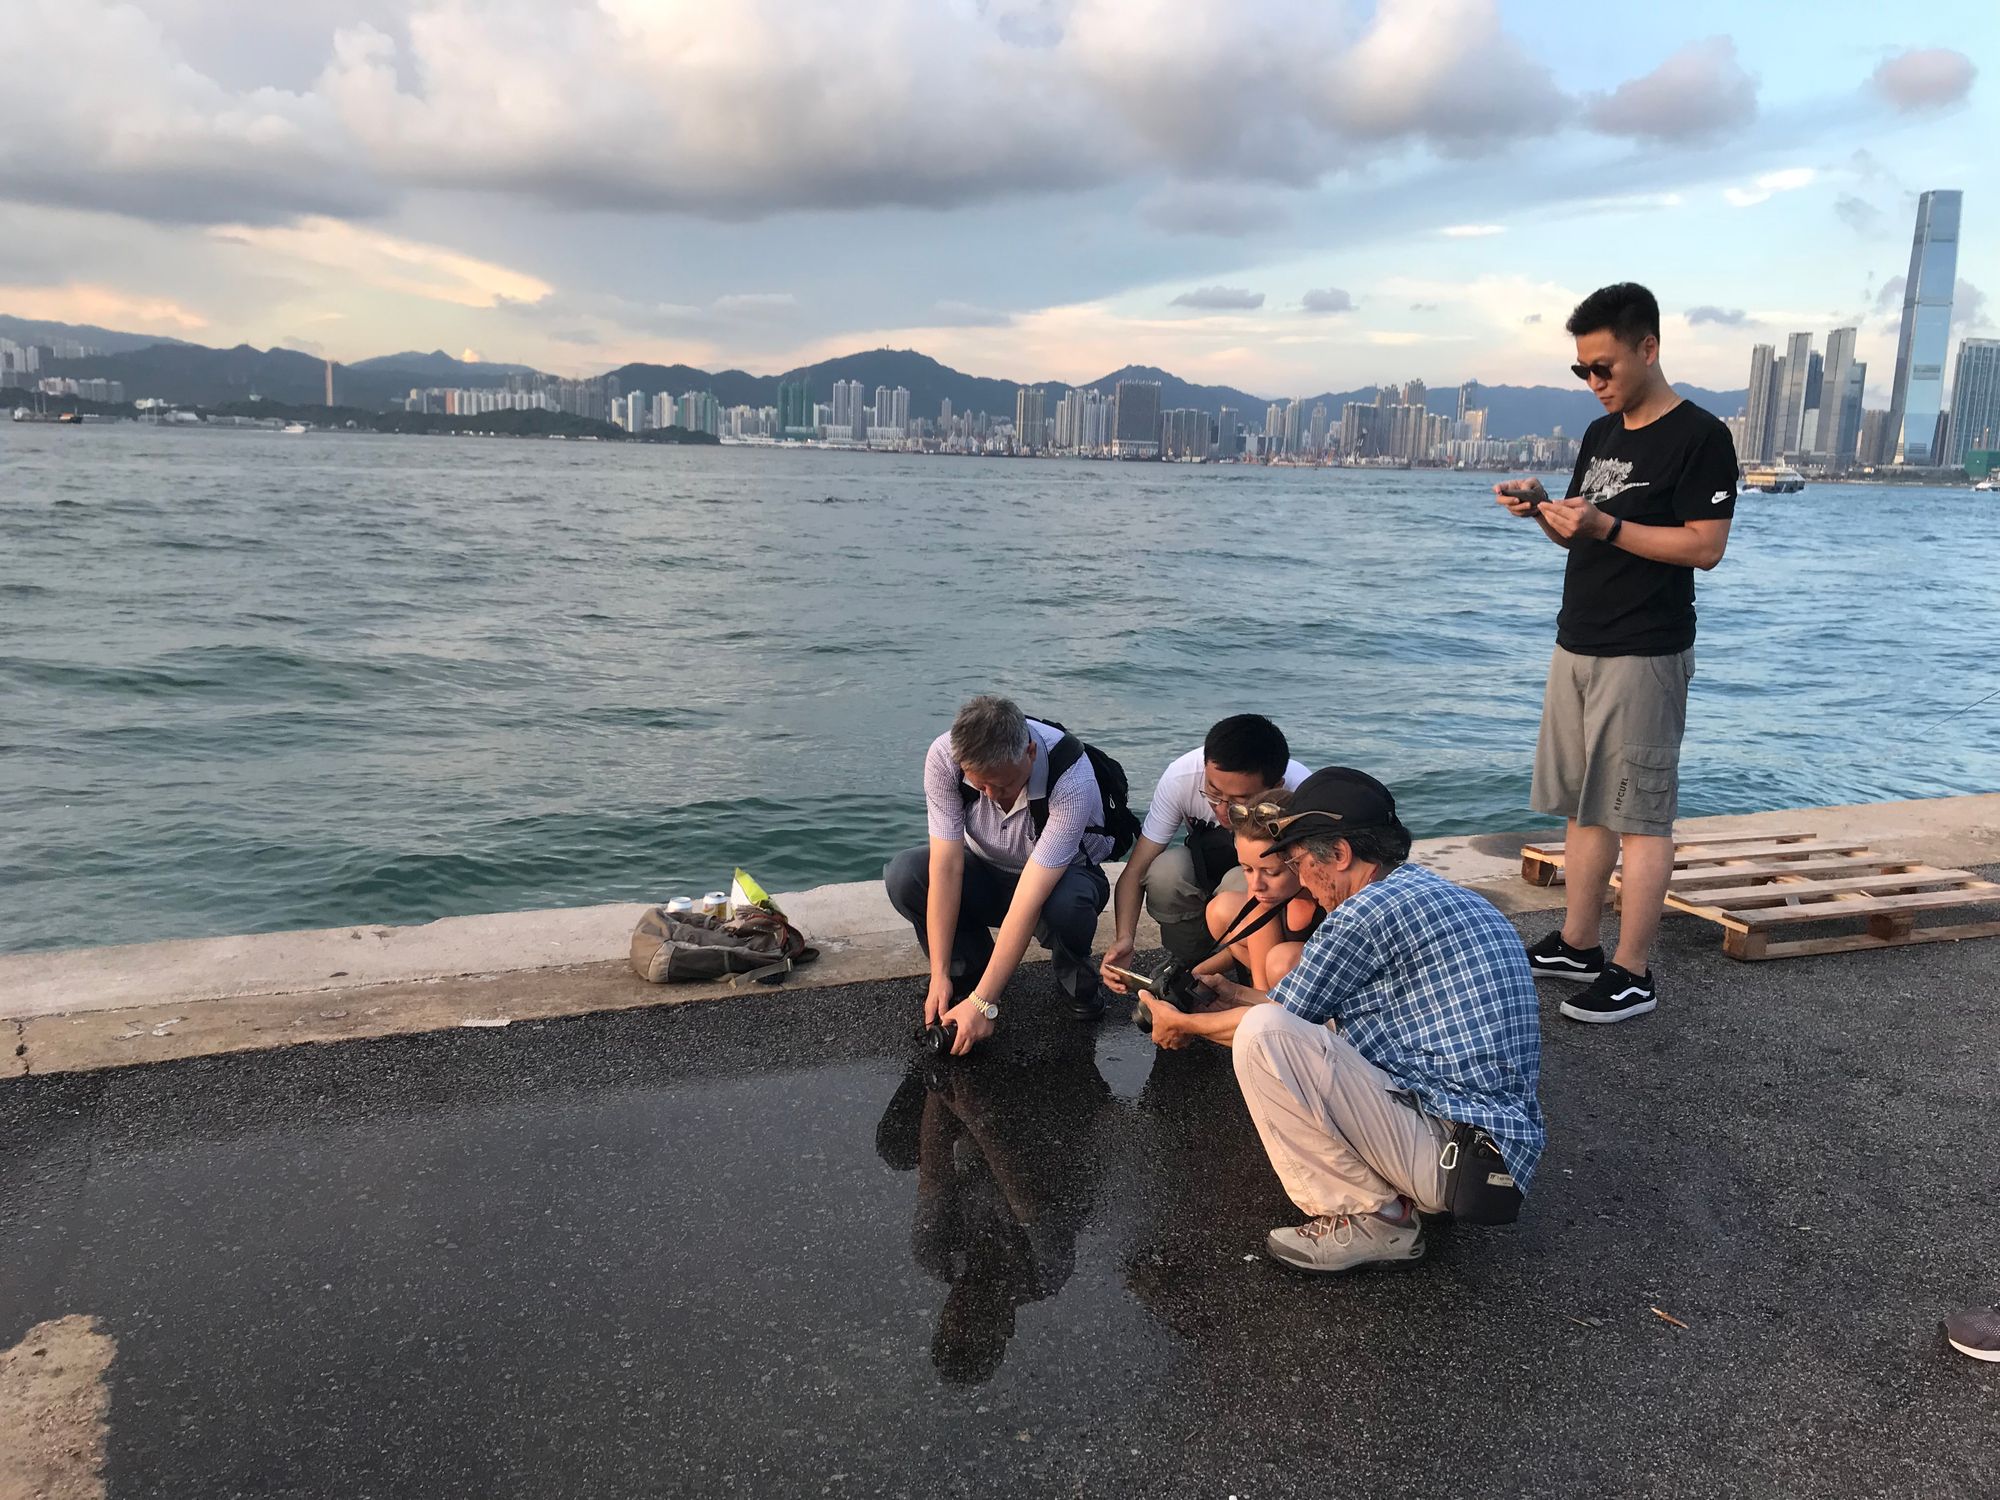 A group of photographers on a pier photographing a puddle. The HK harbour and Kowloon with its hills and skyscrapers are behind them. 